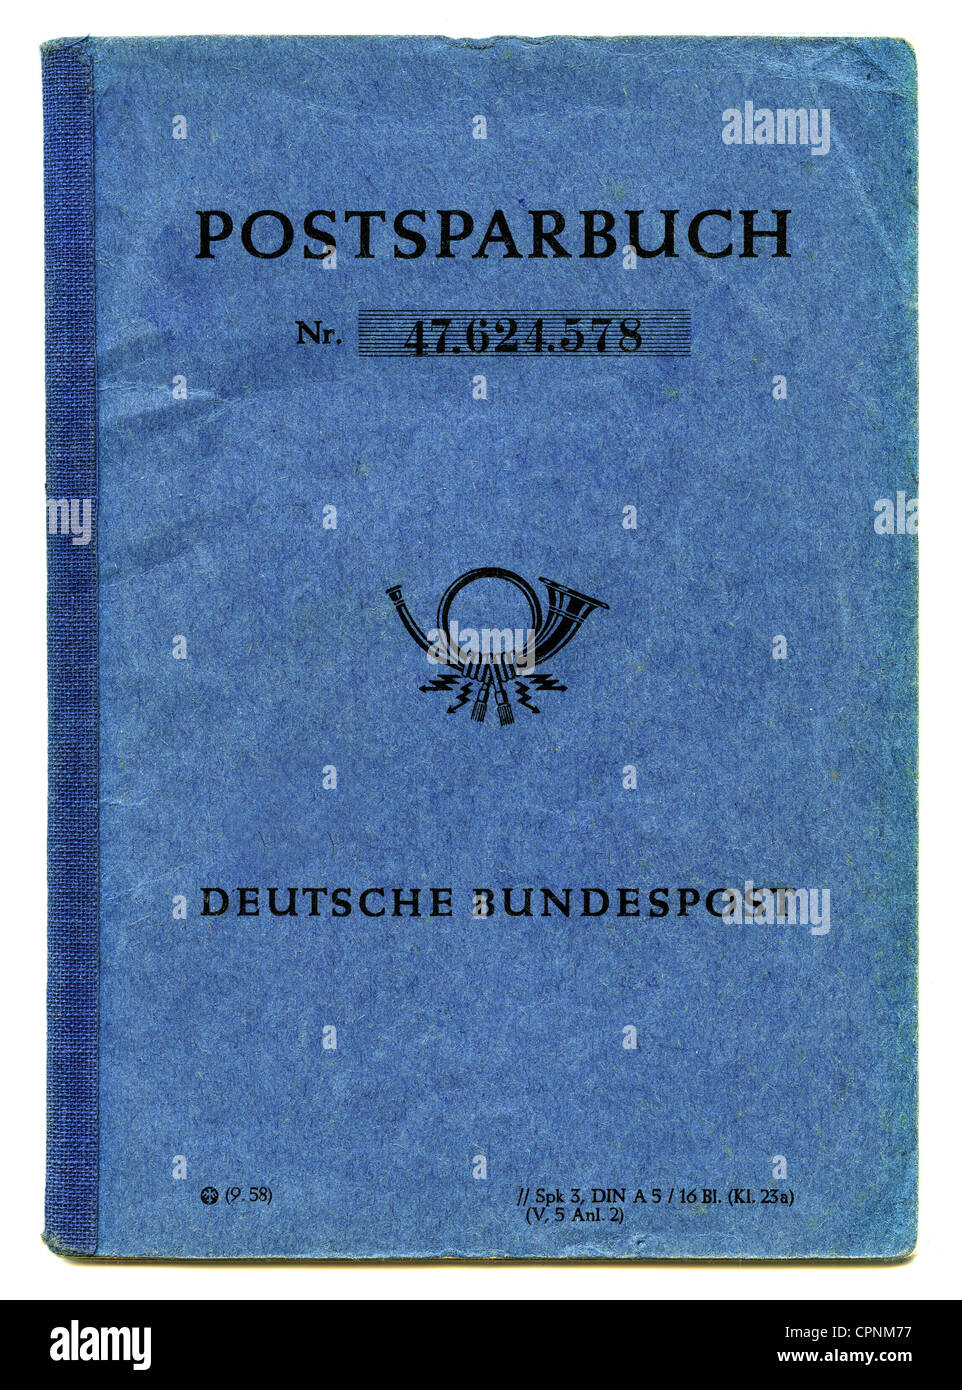 mail, postal savings book of the German Federal Mail, Germany, 1961, Additional-Rights-Clearences-Not Available Stock Photo